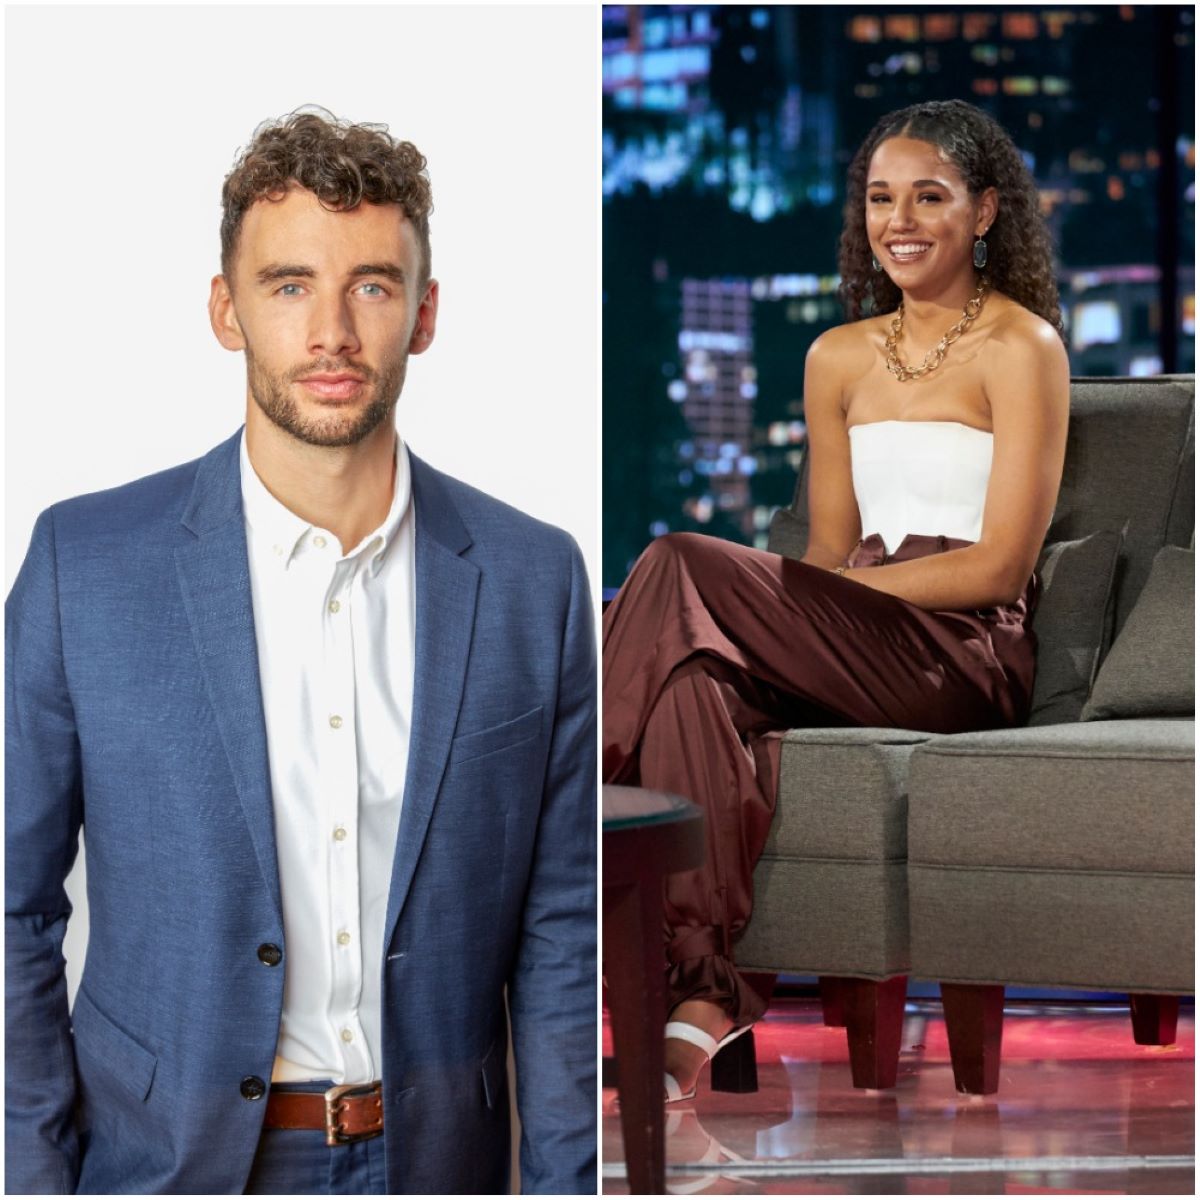 'Bachelor' Nation star Brendan Morais in a blue suit with white shirt and Pieper James in a white tube top and maroon pants.